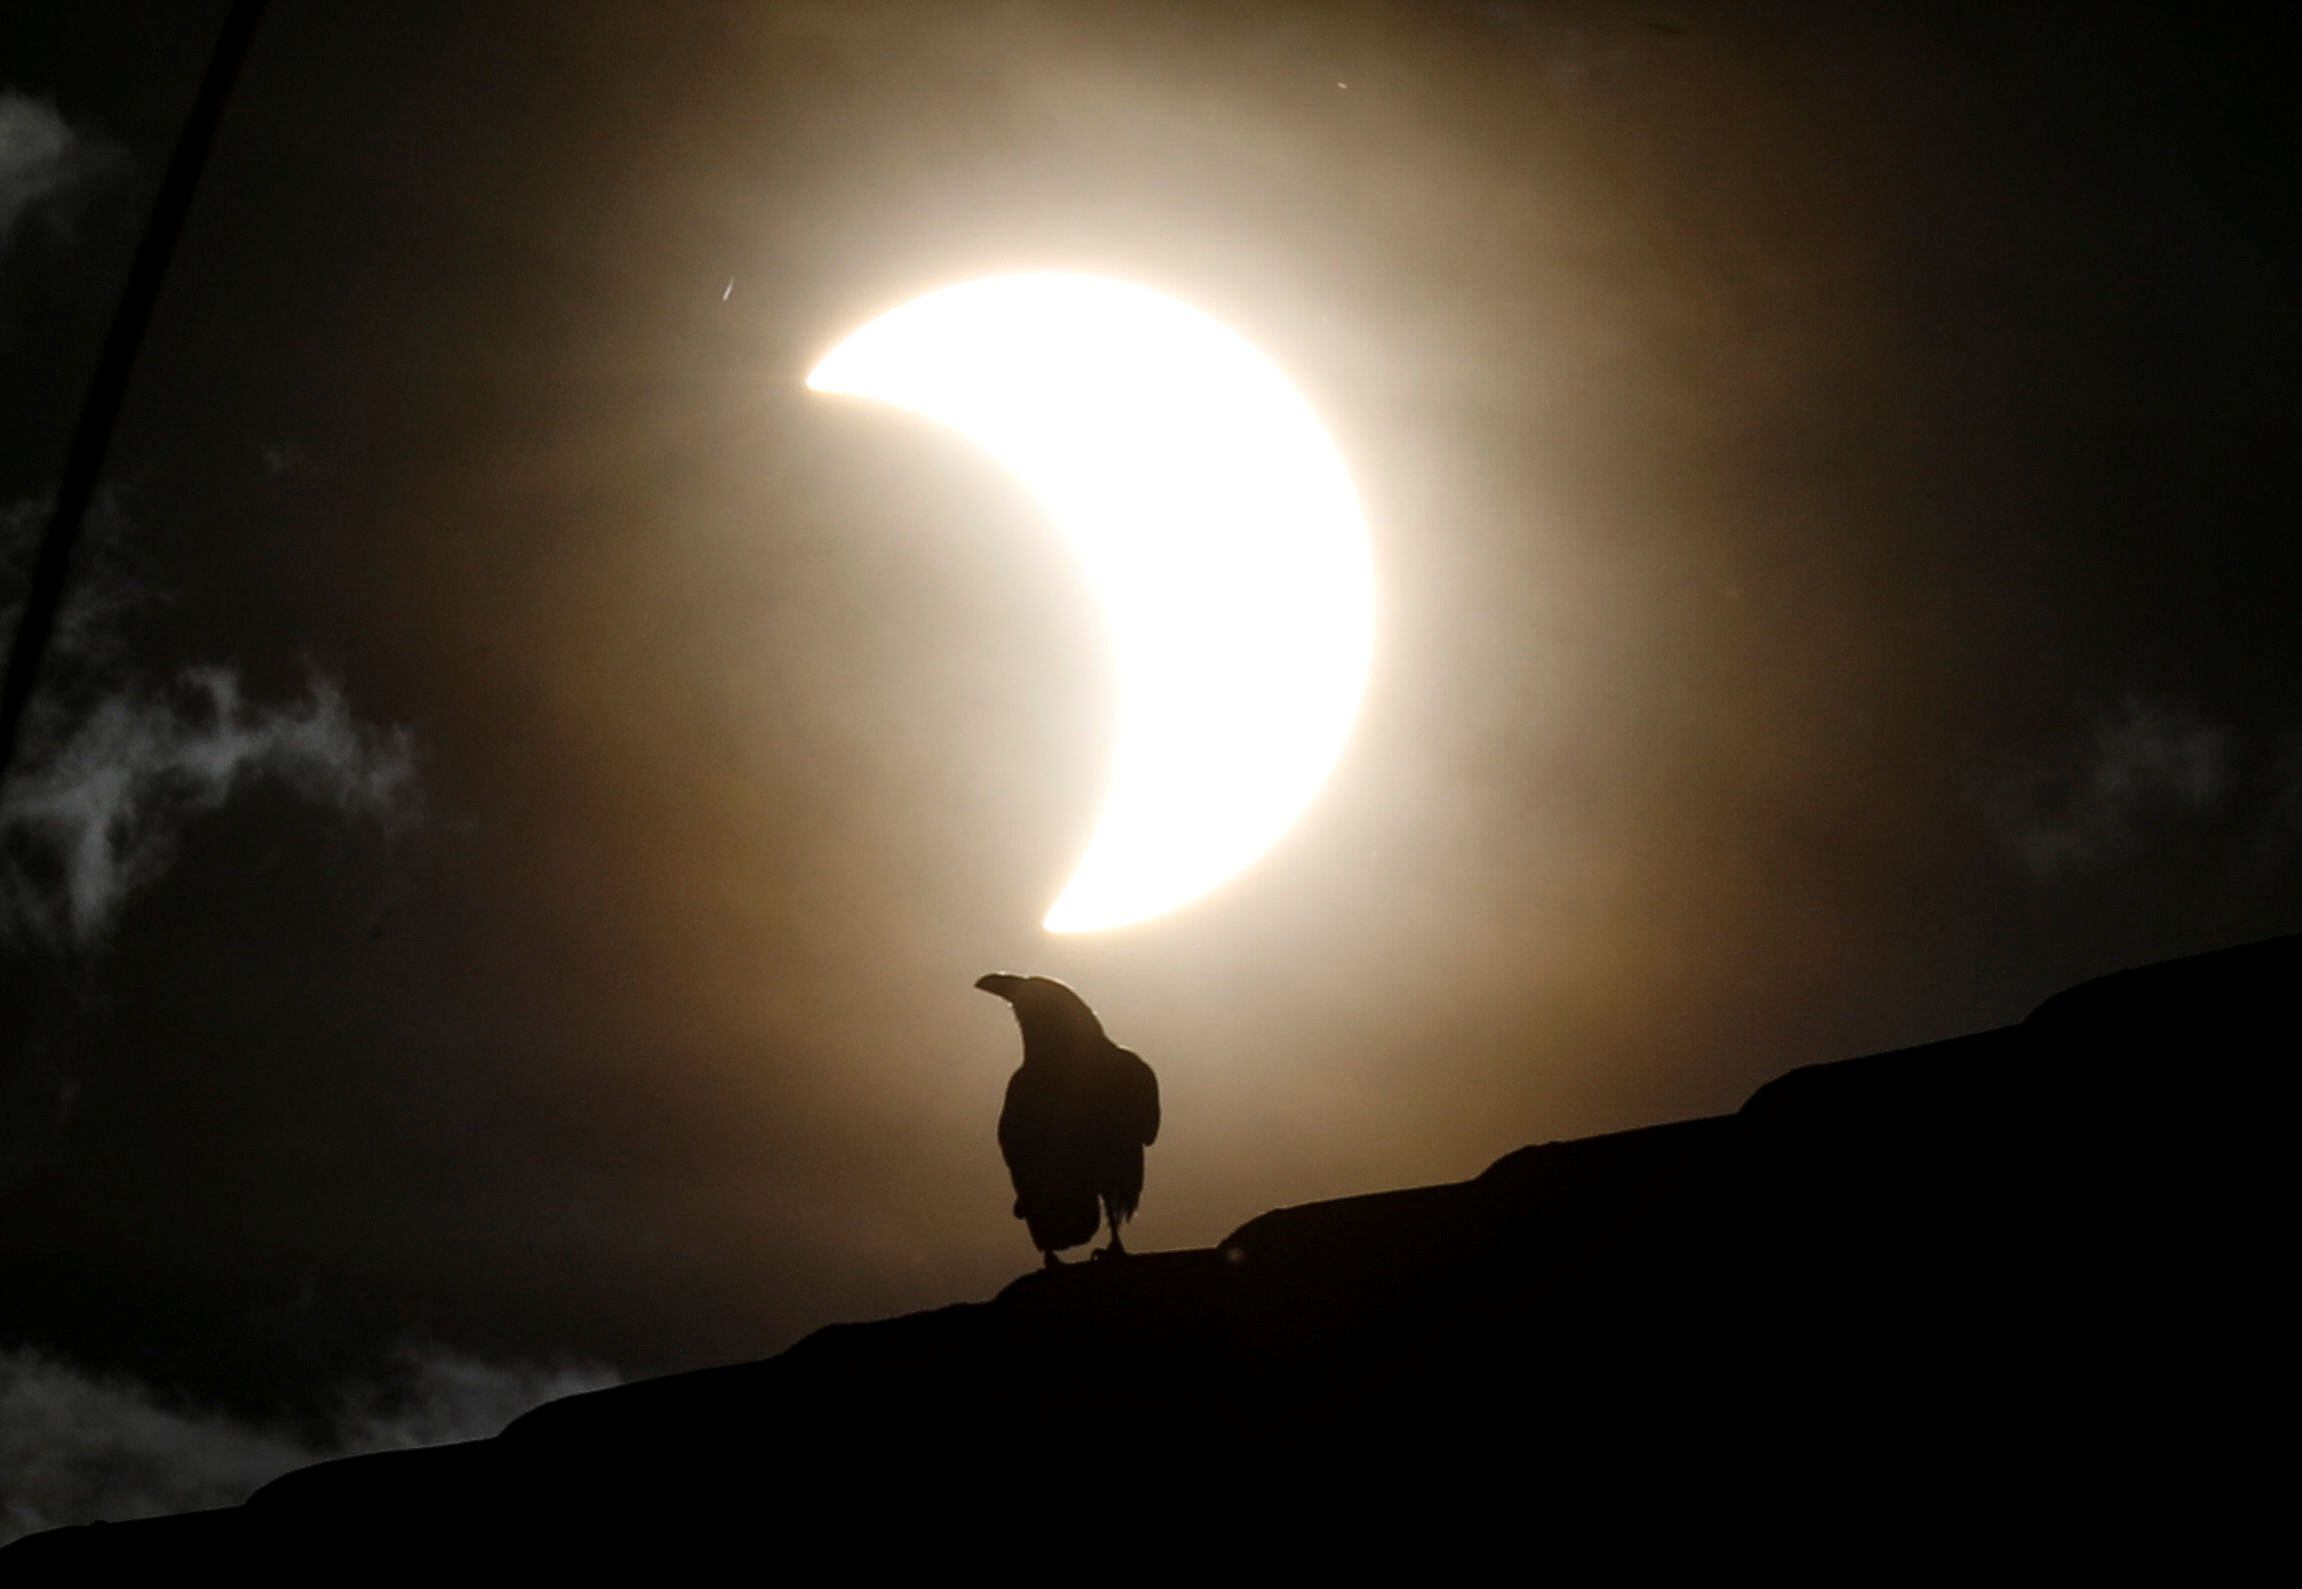 A crow stands on a roof as a partial solar eclipse is observed in Nairobi, Kenya, June 21, 2020. REUTERS/Baz Ratner